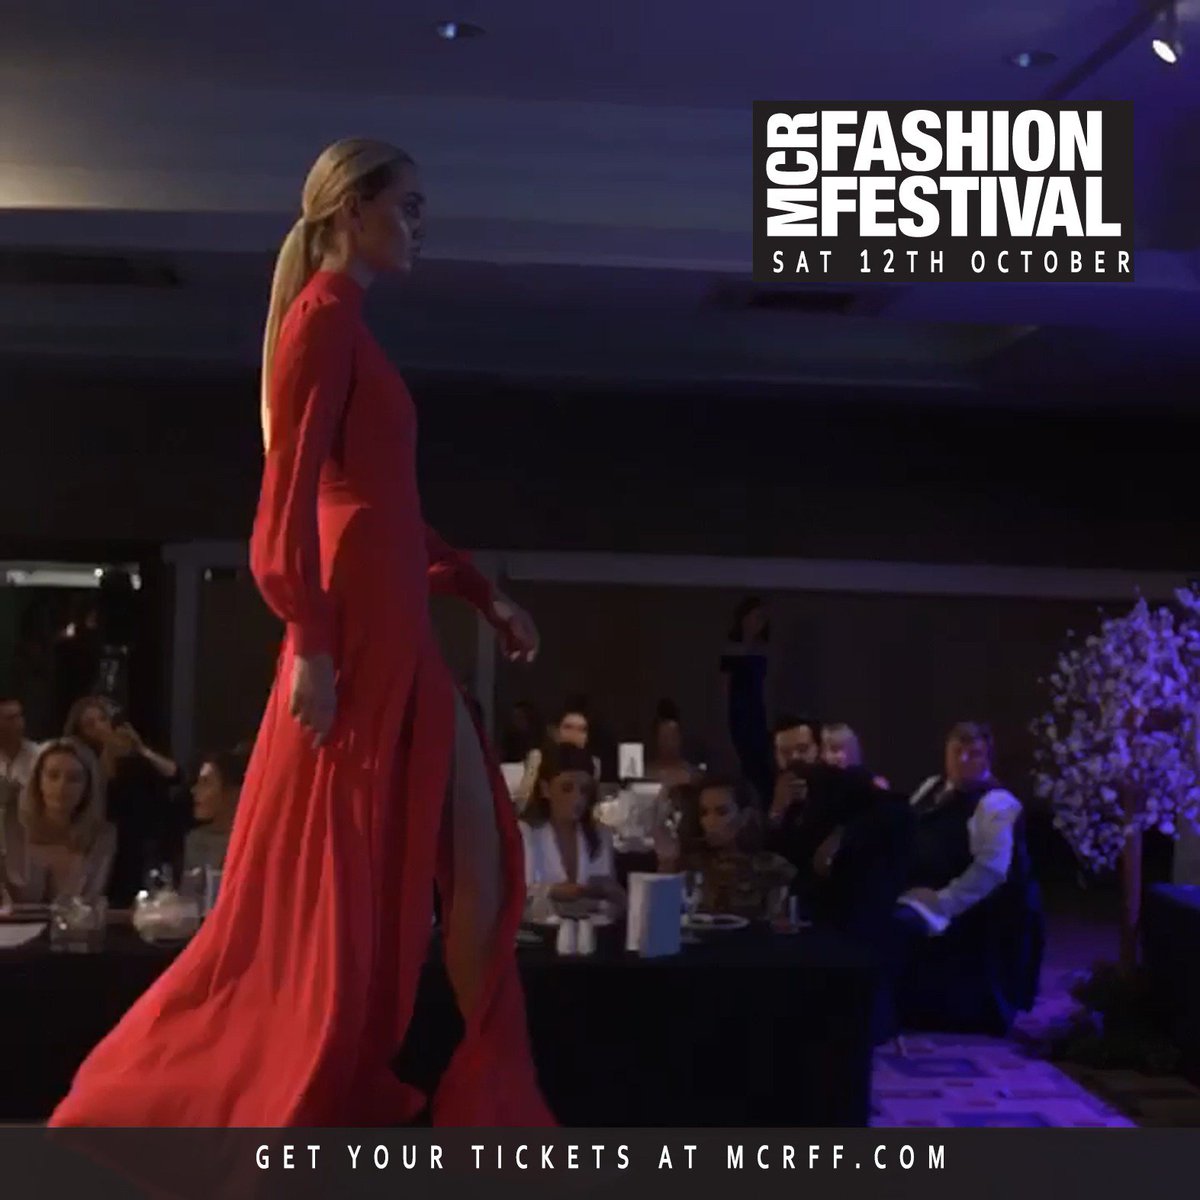 14 weeks to go, do you have your tickets? Over 60% of ticket sales have been sold - MCRFF.com
...
#Manchester #entertainment #fashion #manchesterfashion #MCRFF #Social #whatsonMCR #MCR #WeloveMCR #IloveMCR #FashionFestival #Festival #Event #MCREvent #ManchesterEvent